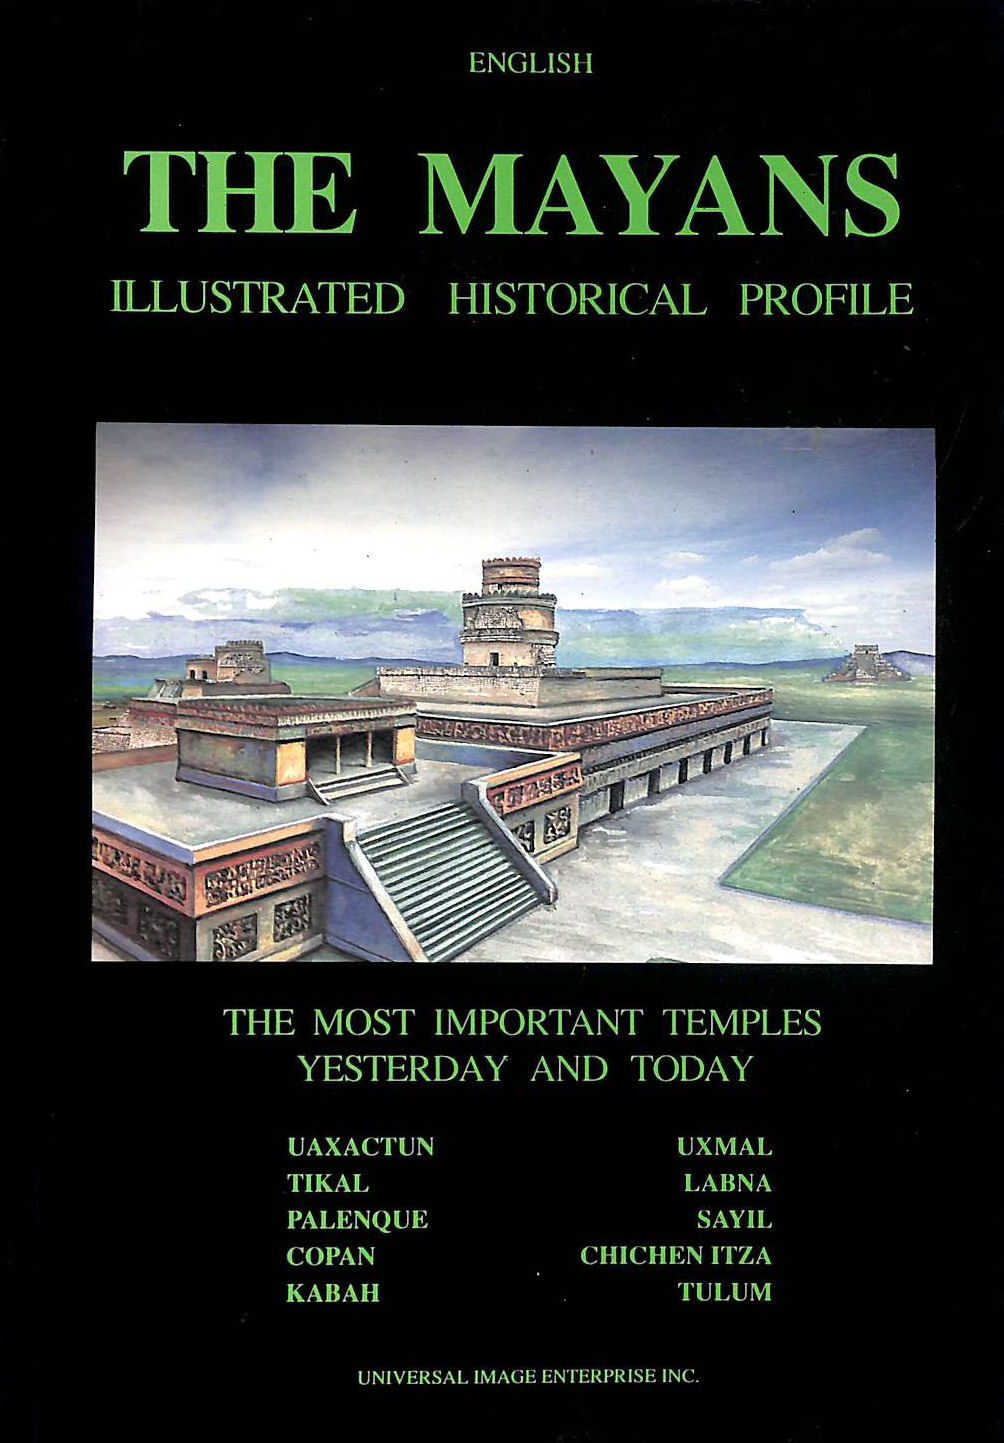 ANON - The Mayans Illustrated Historical Profile